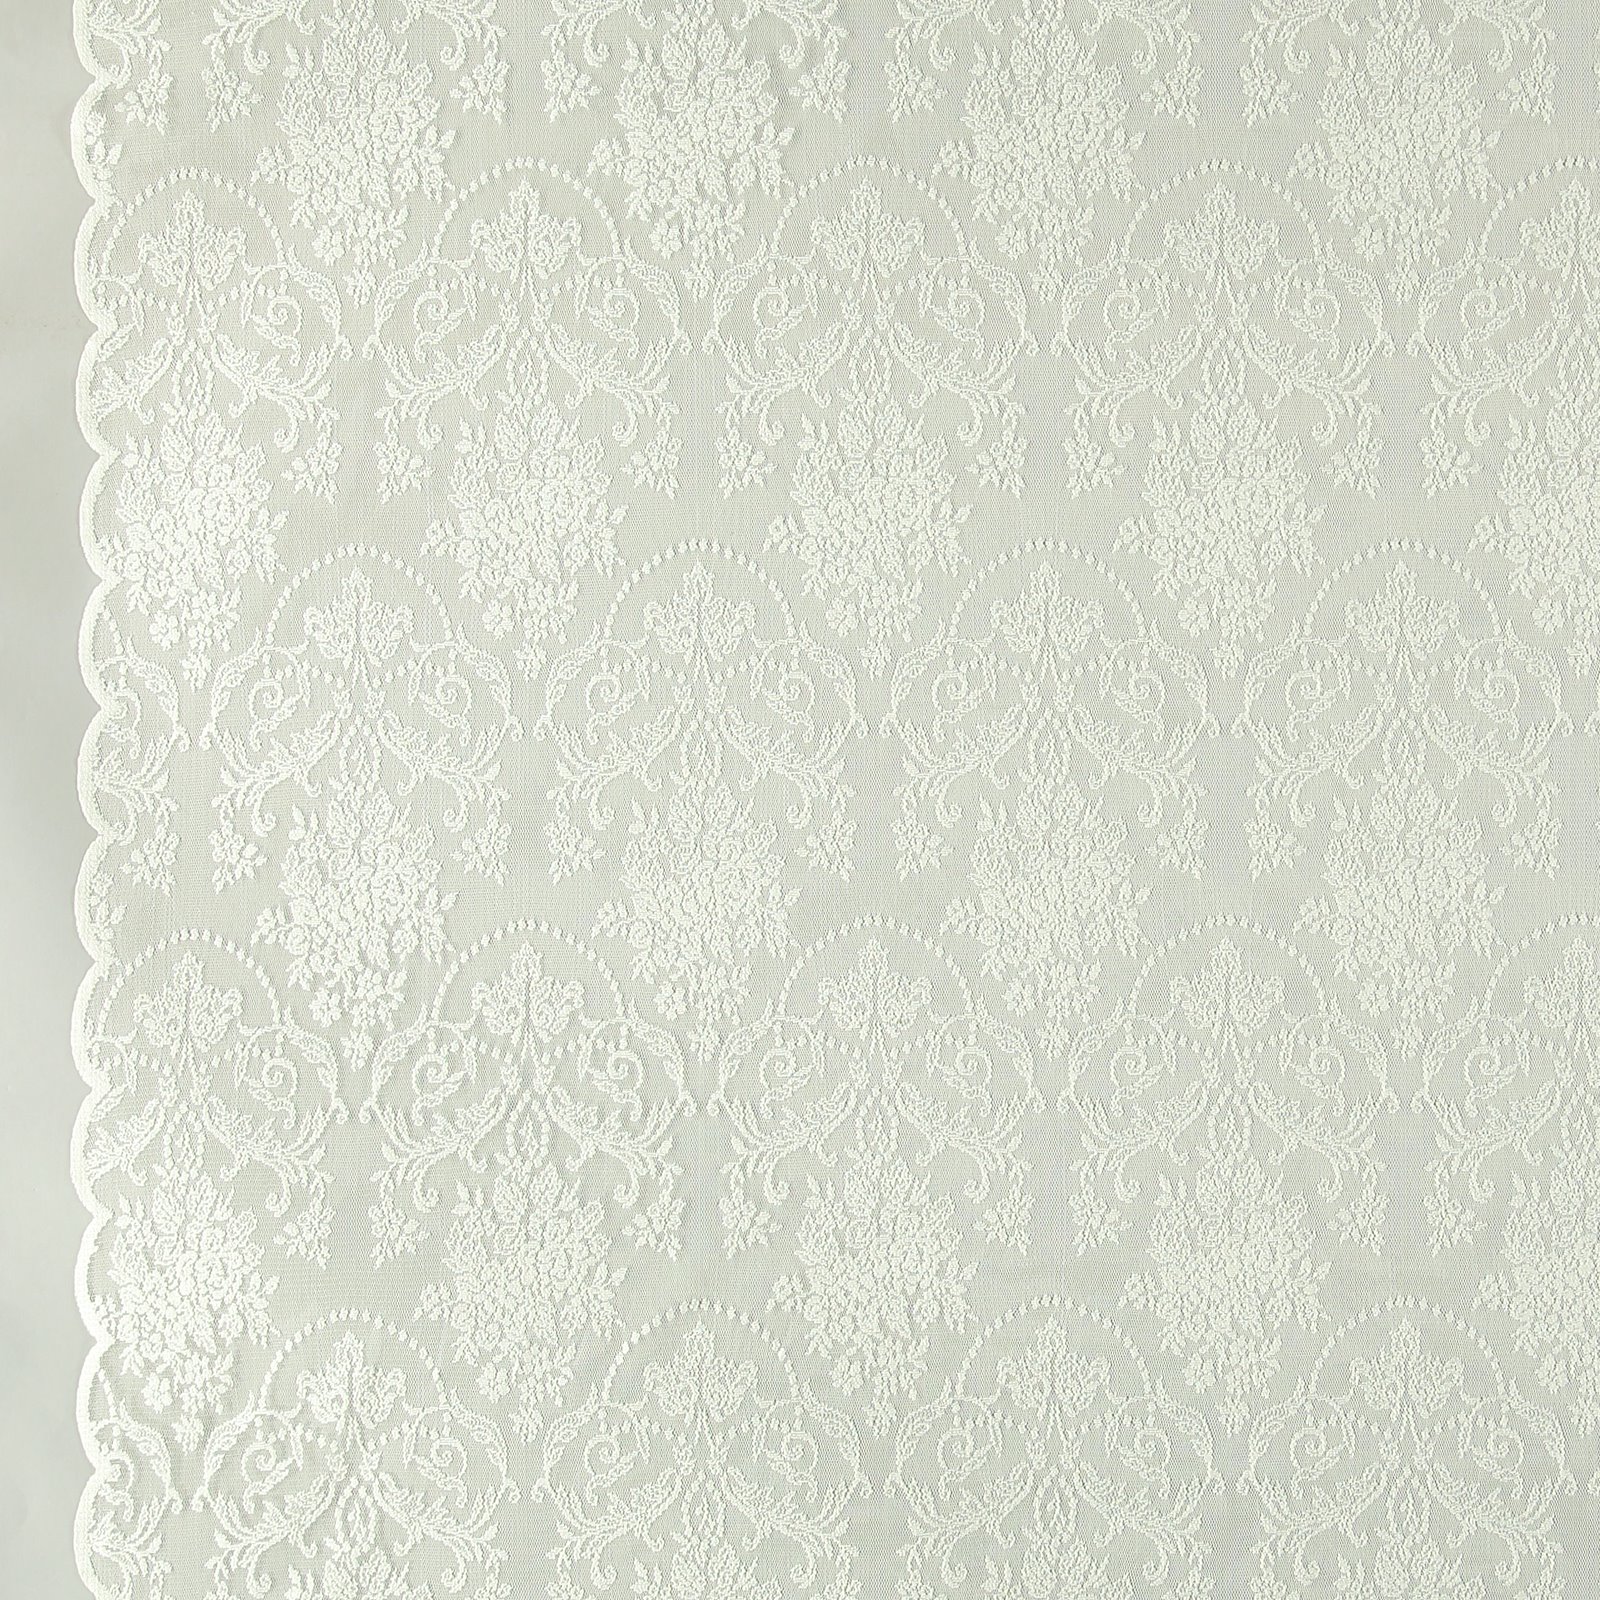 Lace creme w mussel edging 813310_pack_sp